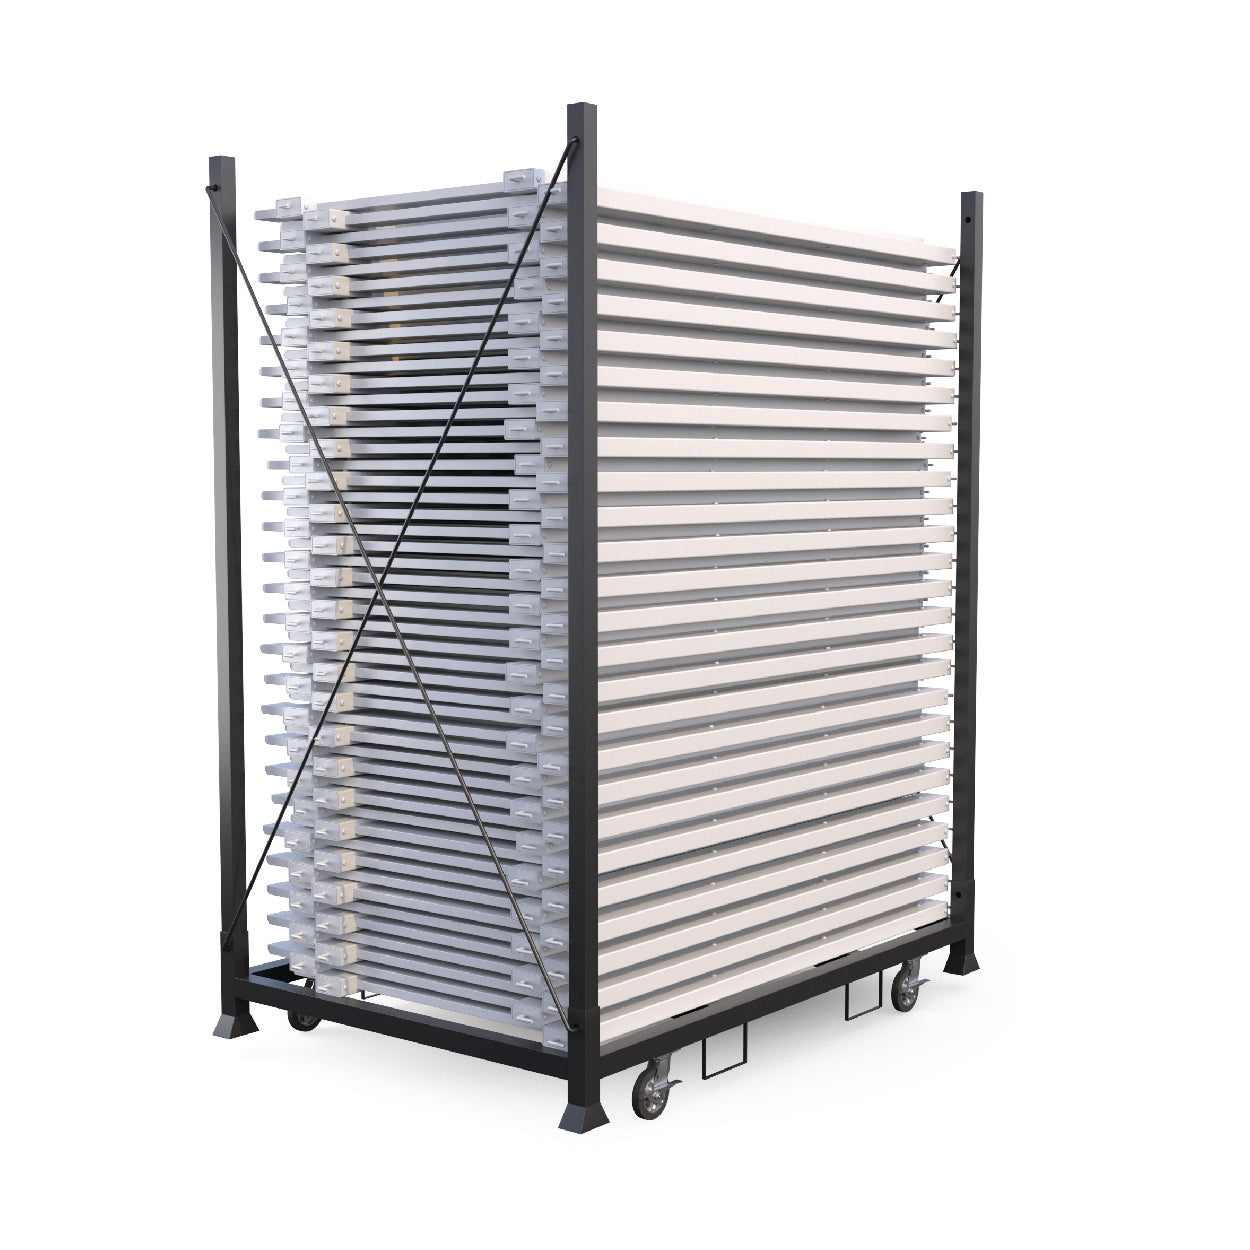 Mod-Fence Cart | Holds up to 50 panels